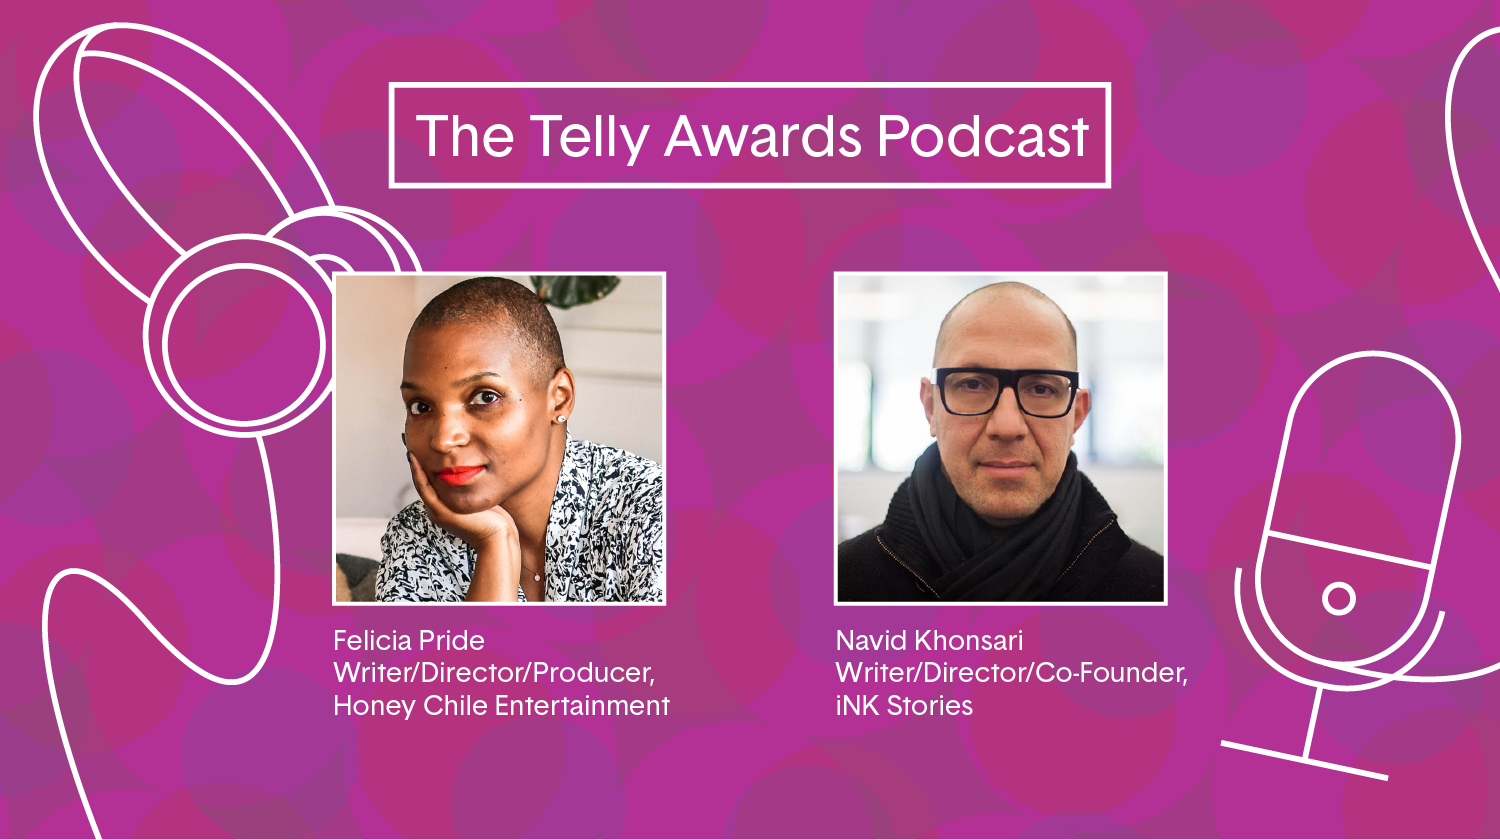 The Telly Awards Podcast Episode 5: Writing